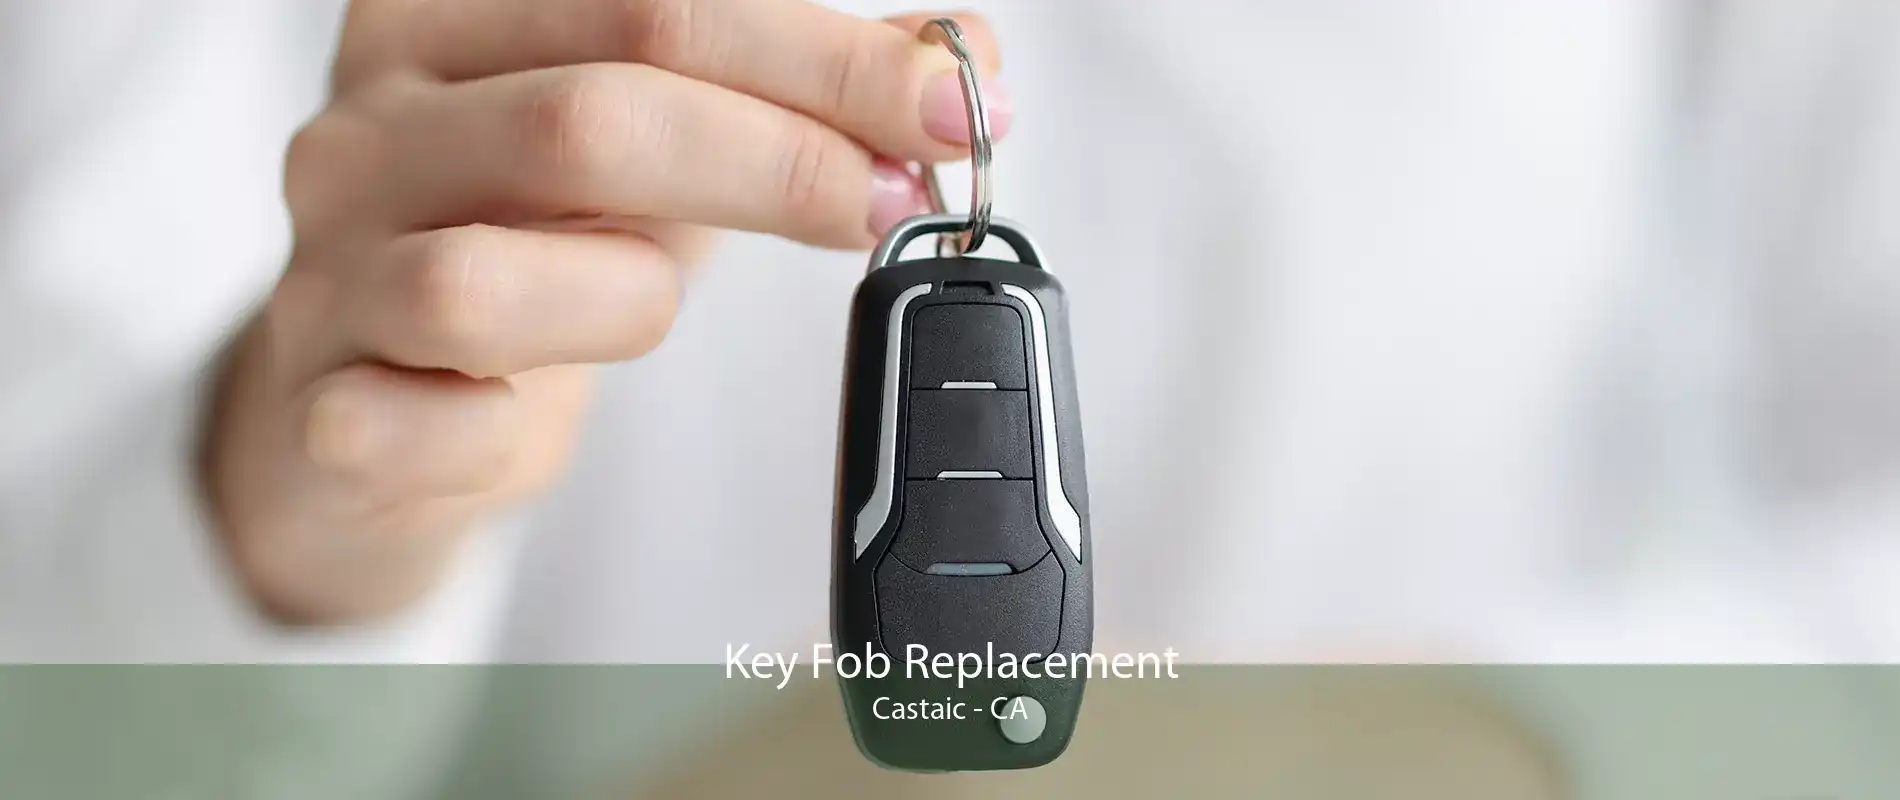 Key Fob Replacement Castaic - CA